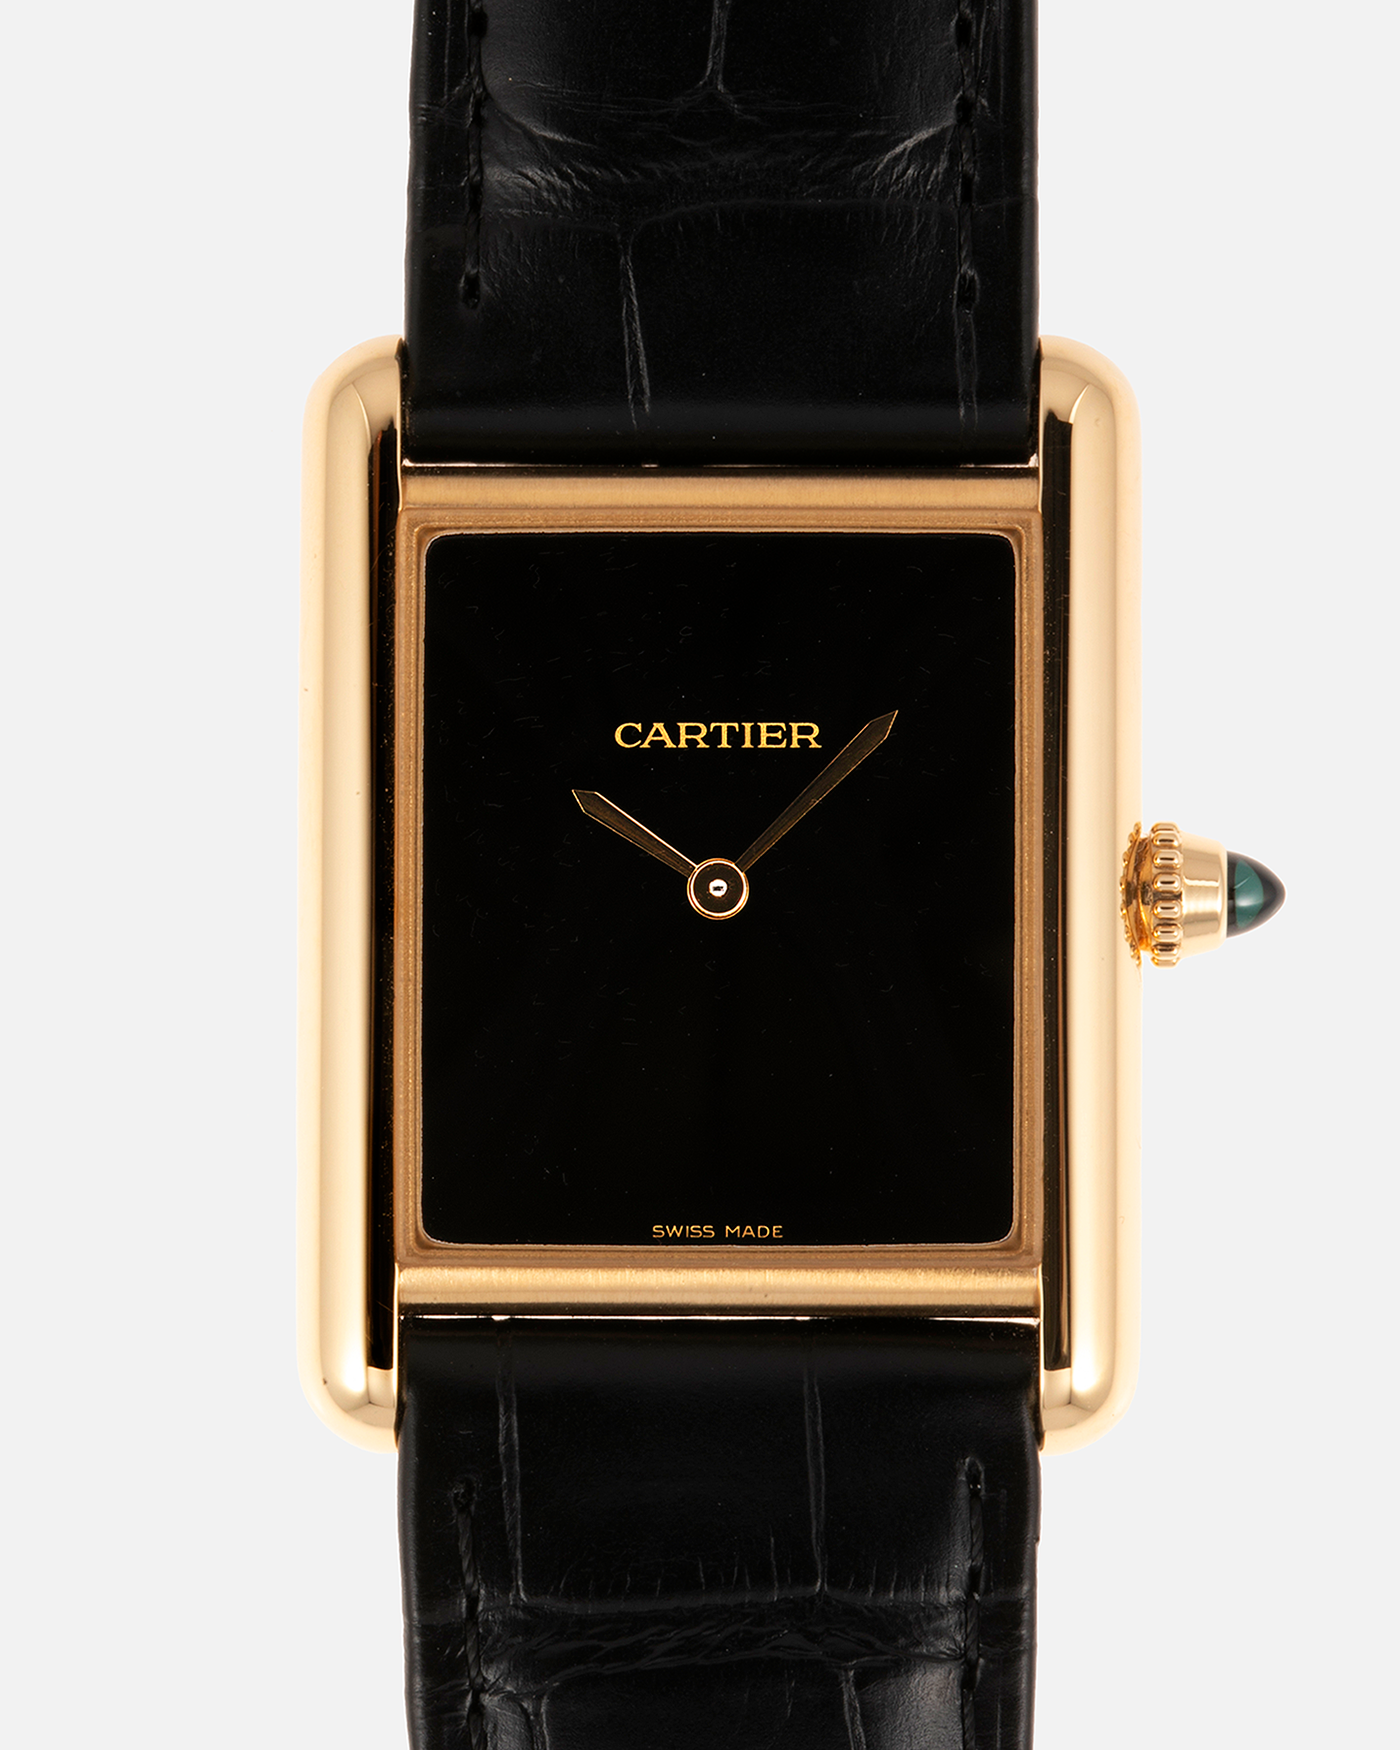 Cartier - Still very much in love with my Cartier Tank Louis